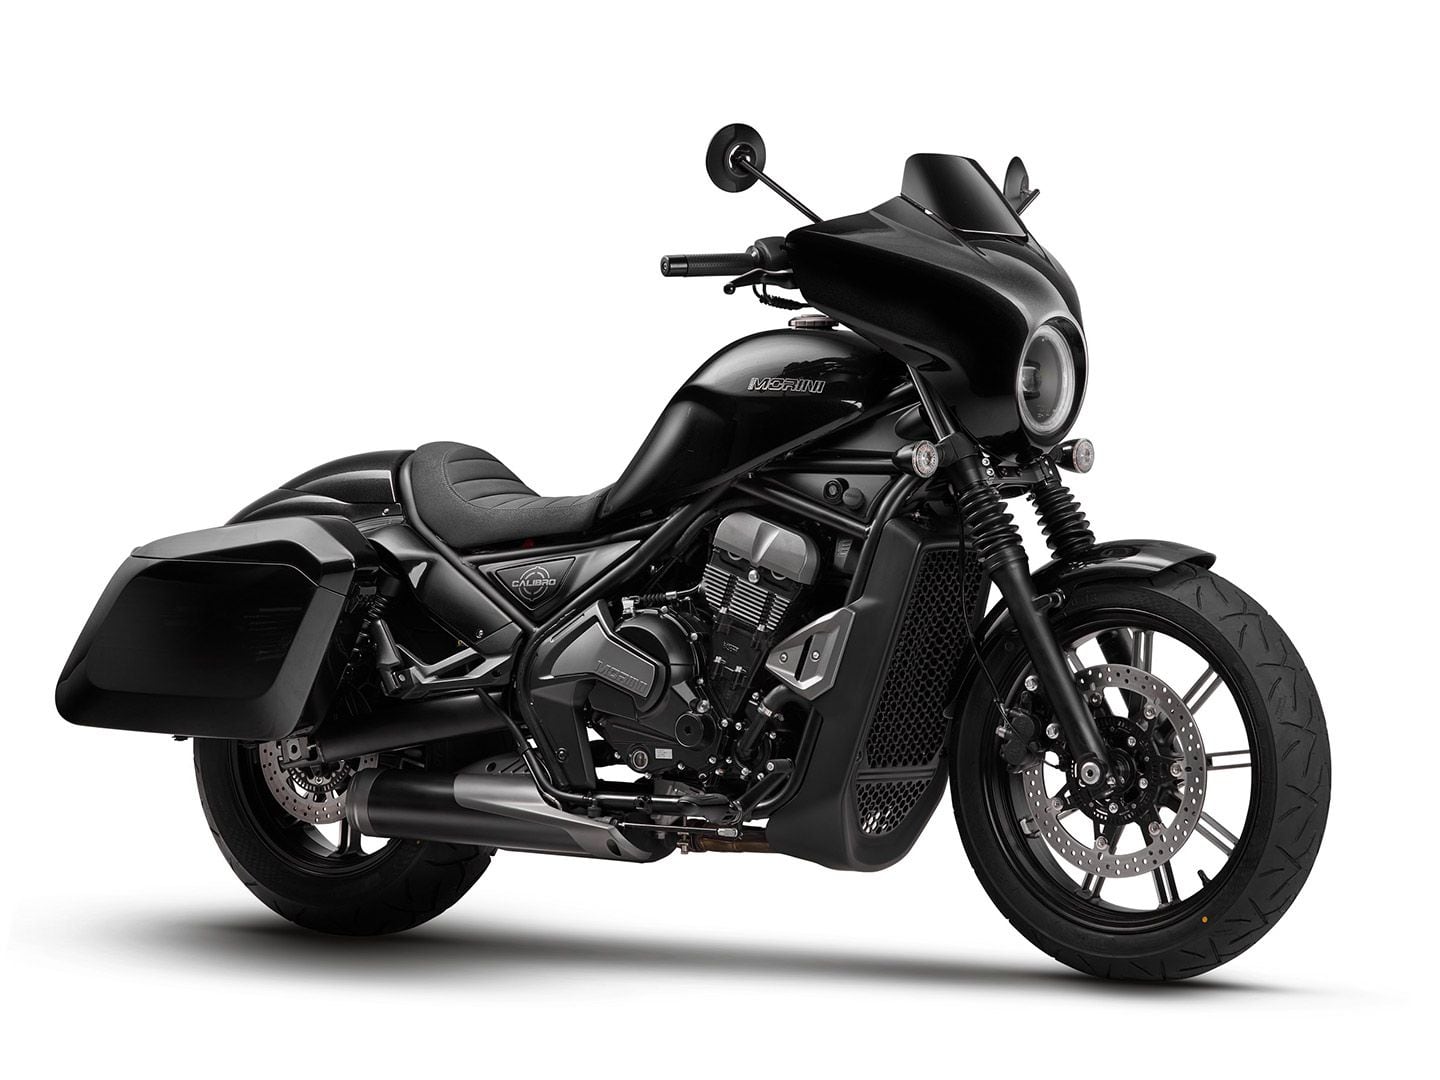 The Calibro will also come in a bagger version, which looks to be a fully focused design rather than just a bunch of add-ons. At 650cc, it also won’t have too many competitors.